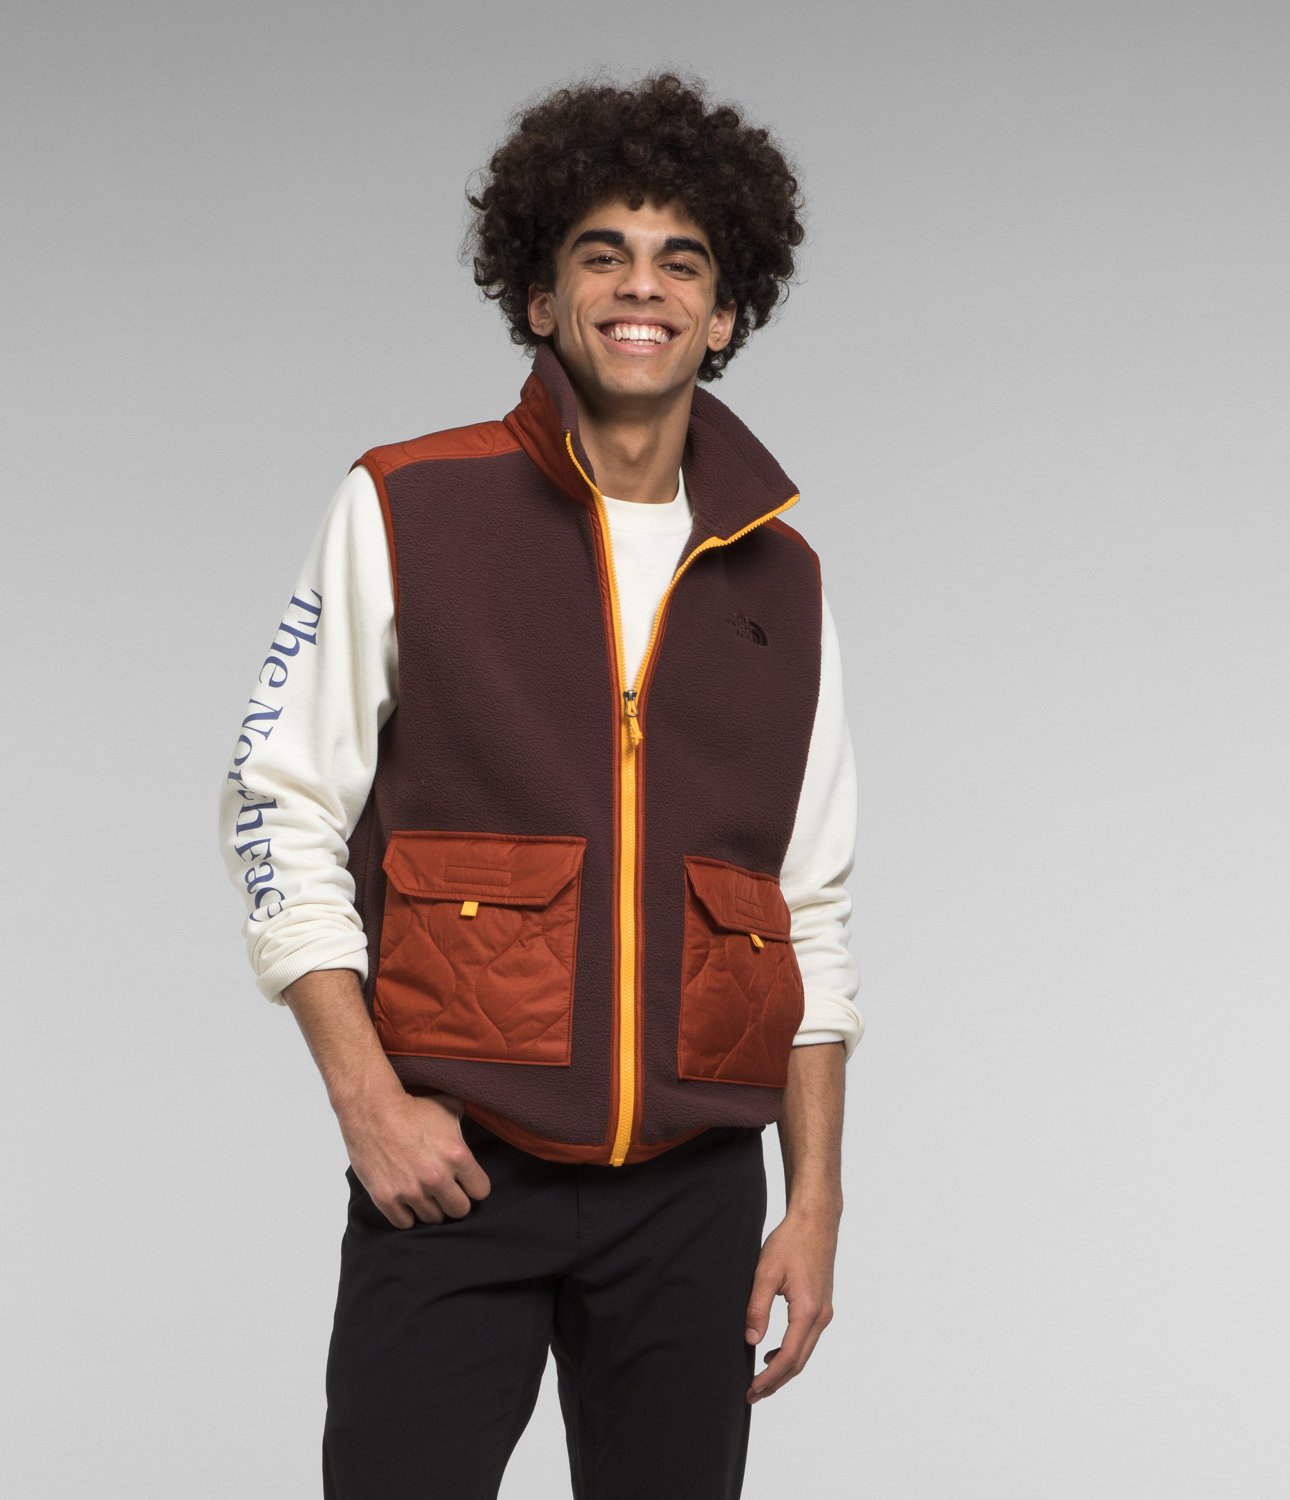 The North Face Mens Royal Arch Vest